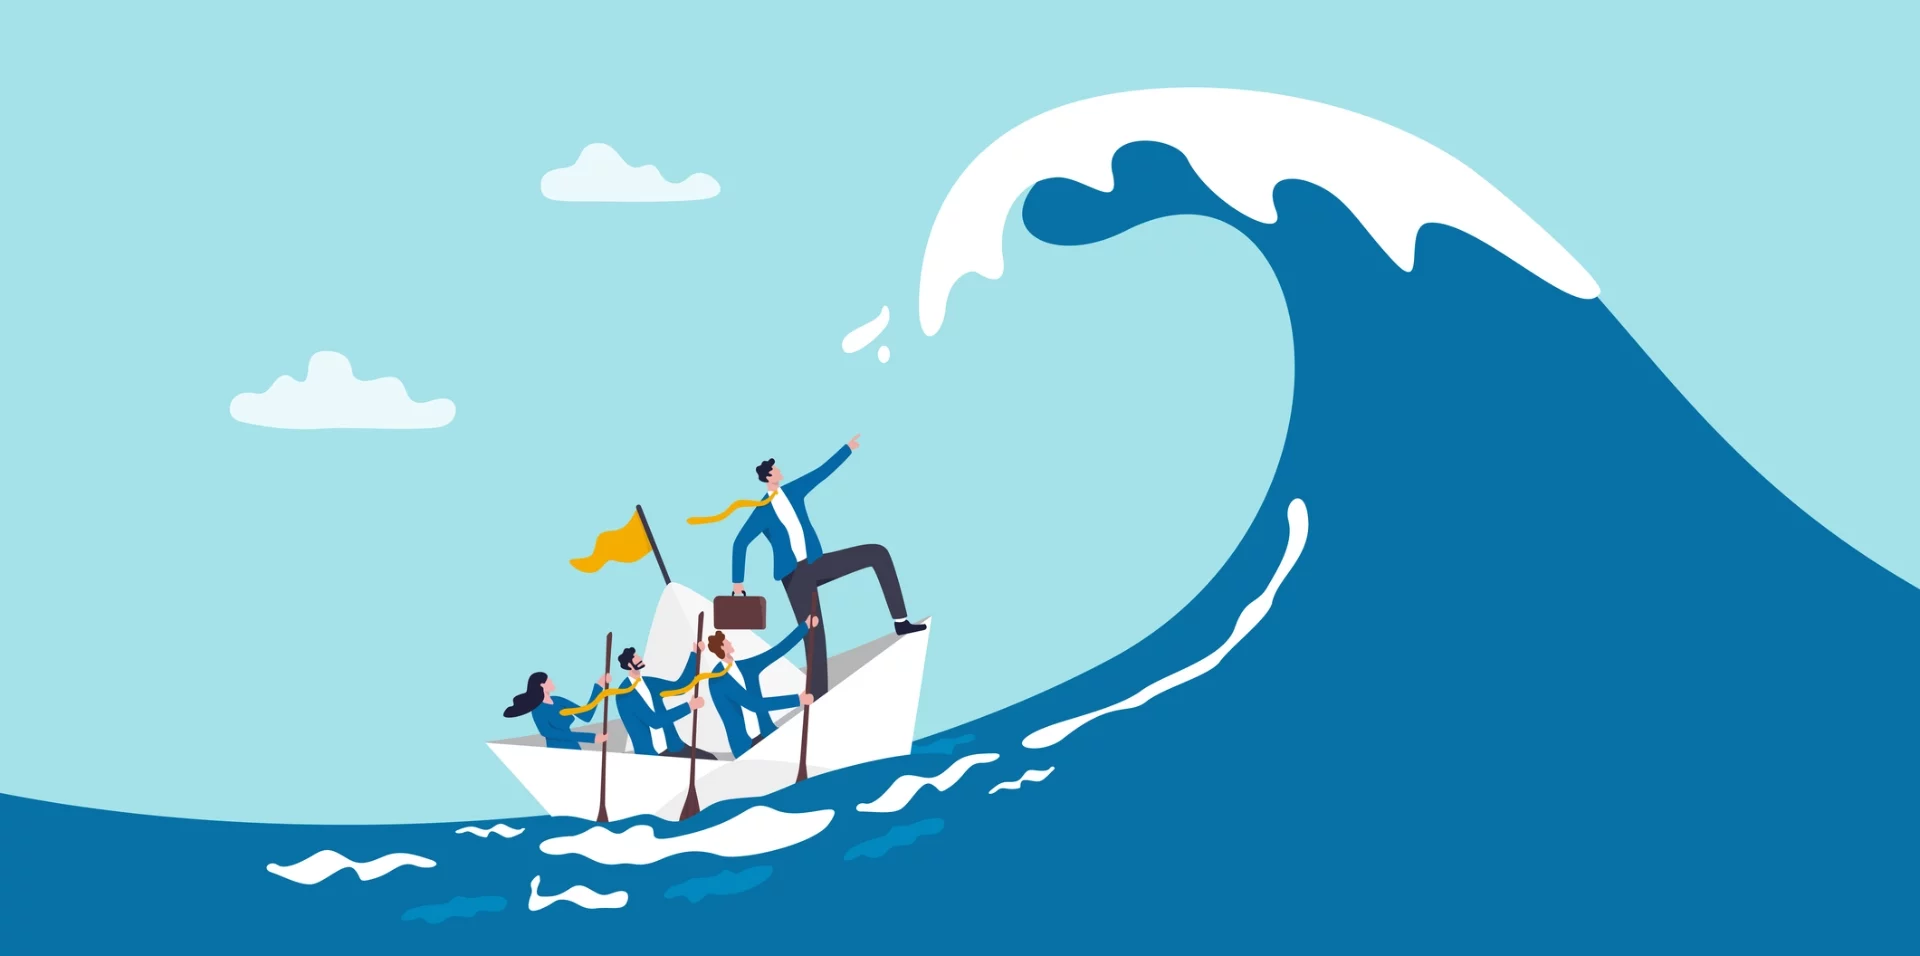 4 cartoon people in a boat with paddles riding a large wave